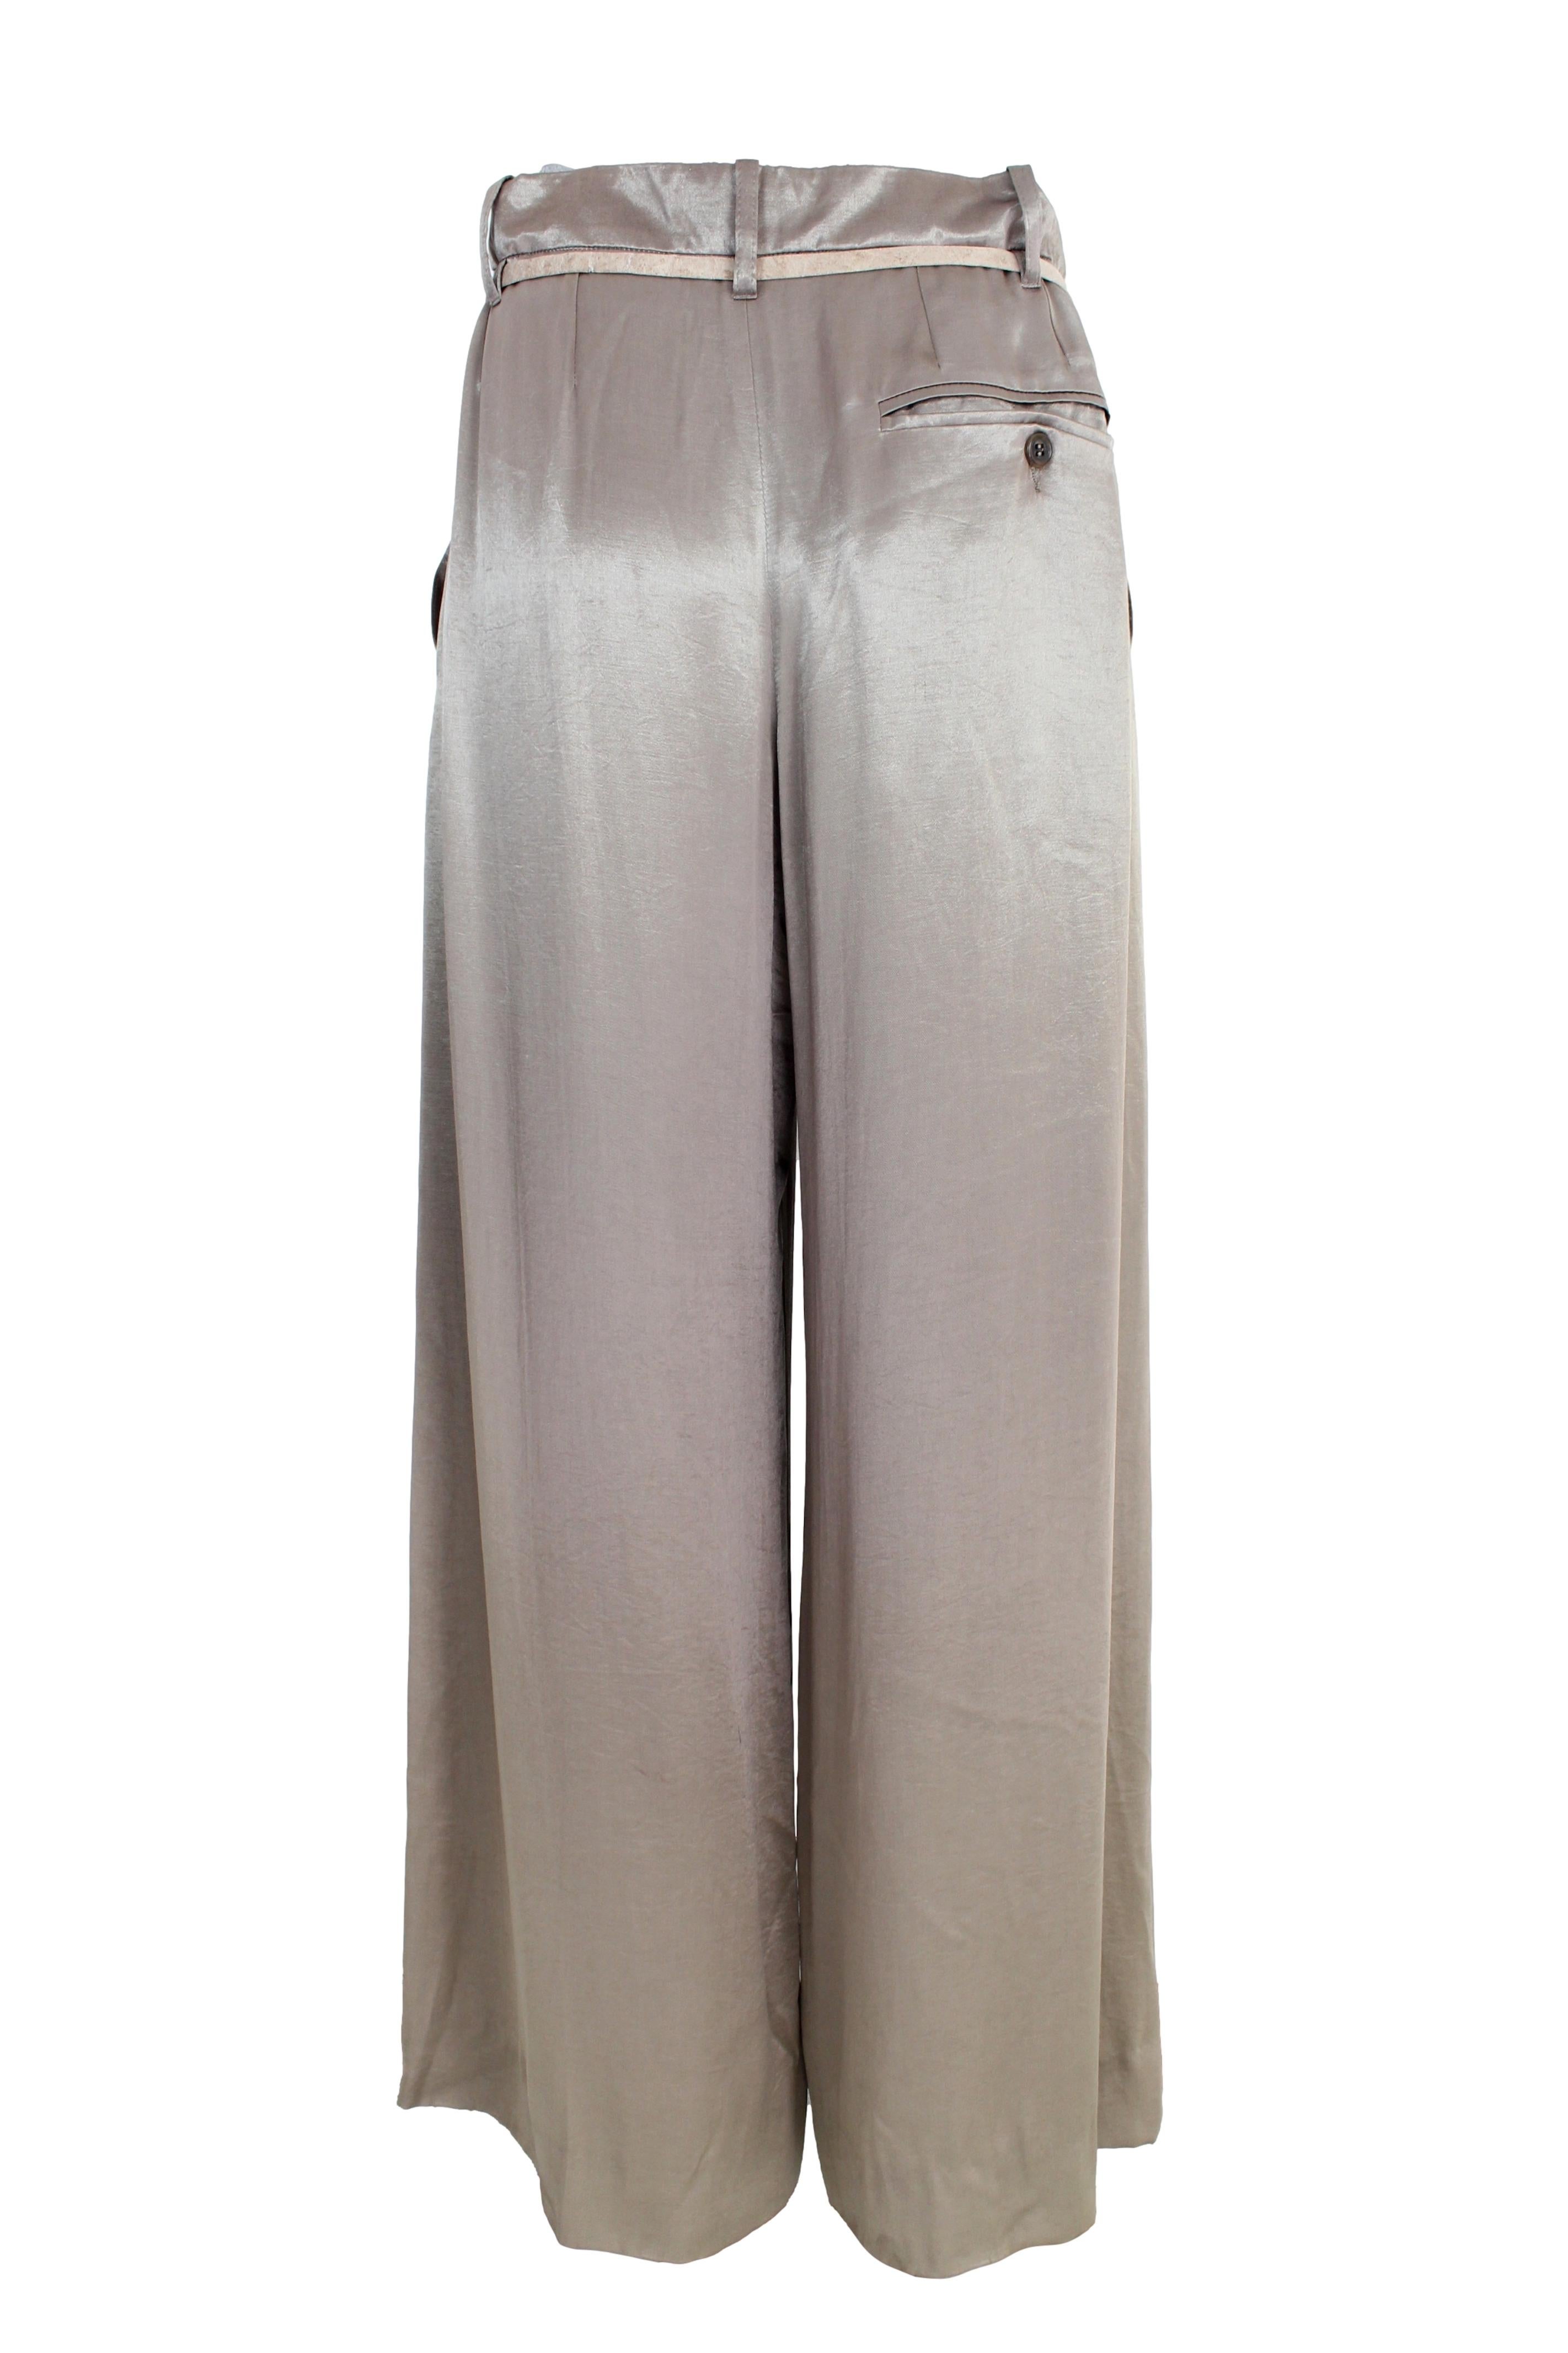 Ann Demeulemeester vintage 90s trousers. Palazzo trousers, soft style. Taupe color, concealed button closure. 53% rayon fabric, 47% acetate, 100% leather waist belt. Made in Belgium

Condition: Excellent

Item used few times, it remains in its